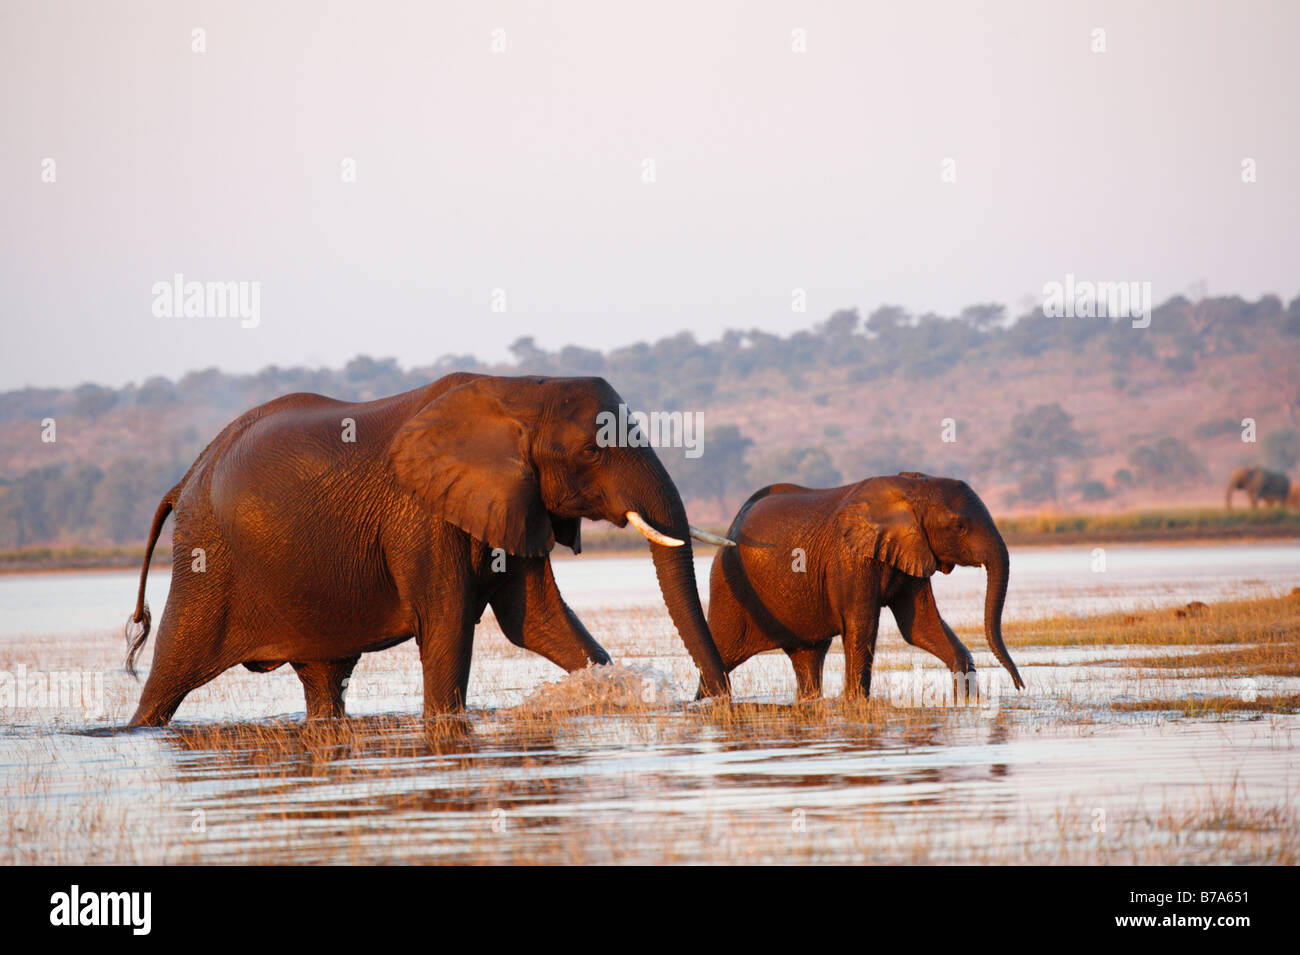 A cow elephant and calf walking out of the Chobe River after crossing with a third elephant on the bank in the distance Stock Photo